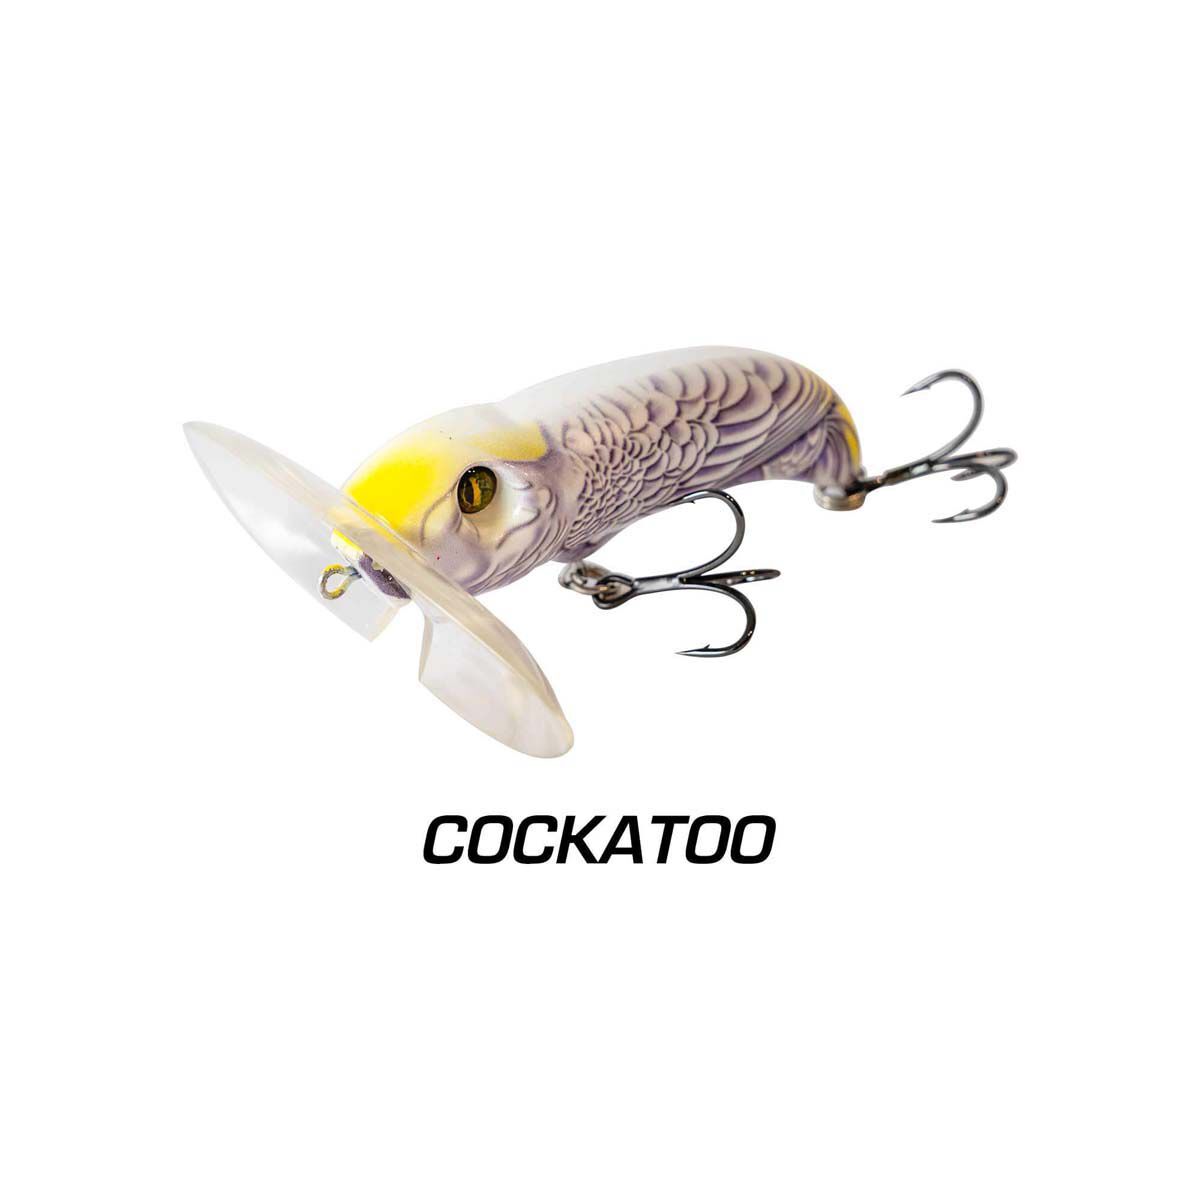 Clearance Lures - Balista Lures